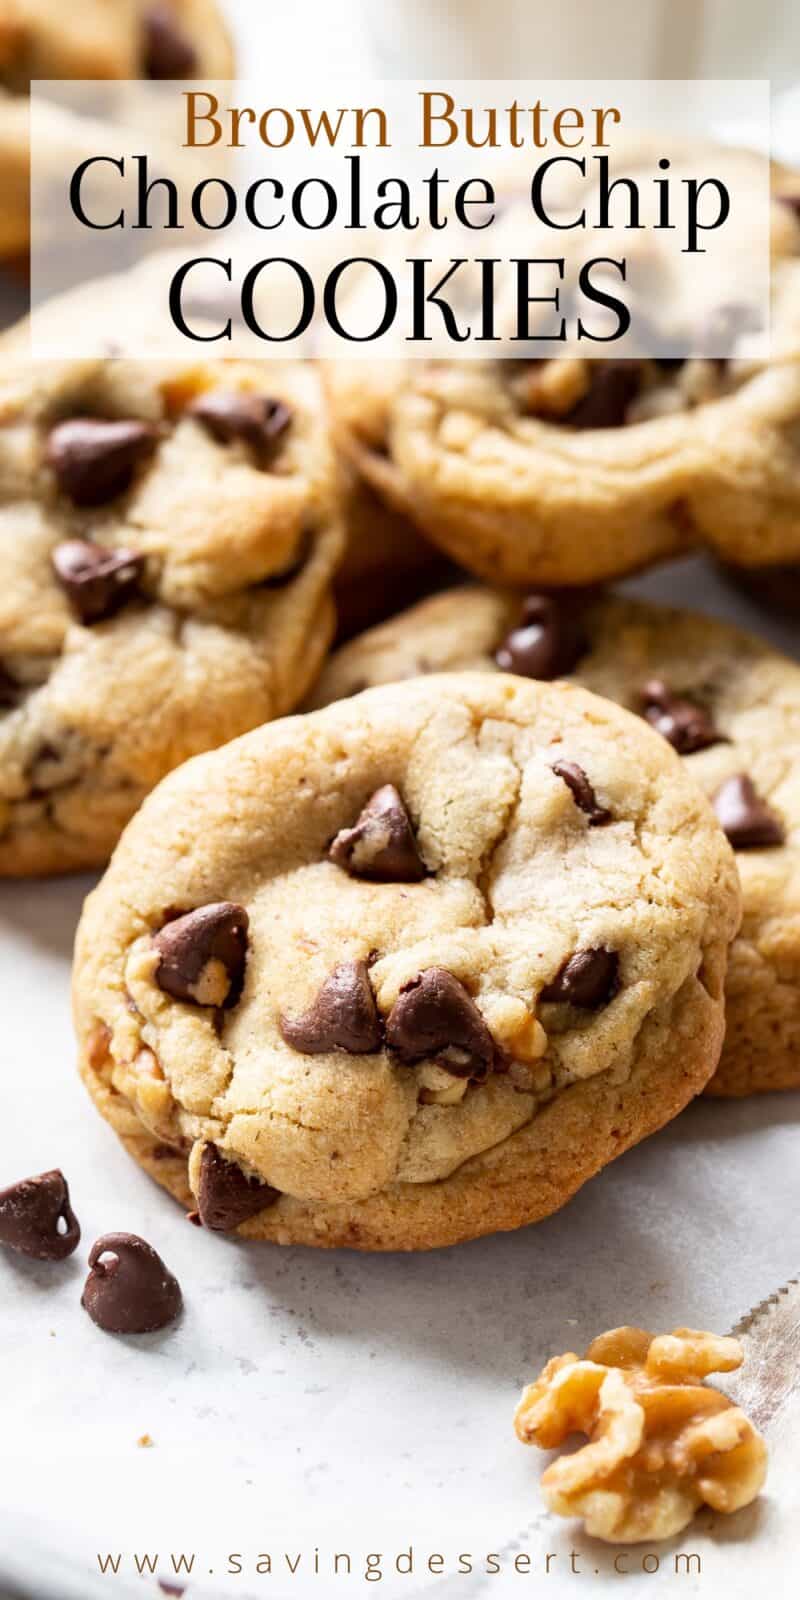 Closeup of a brown butter chocolate chip cookie on a tray